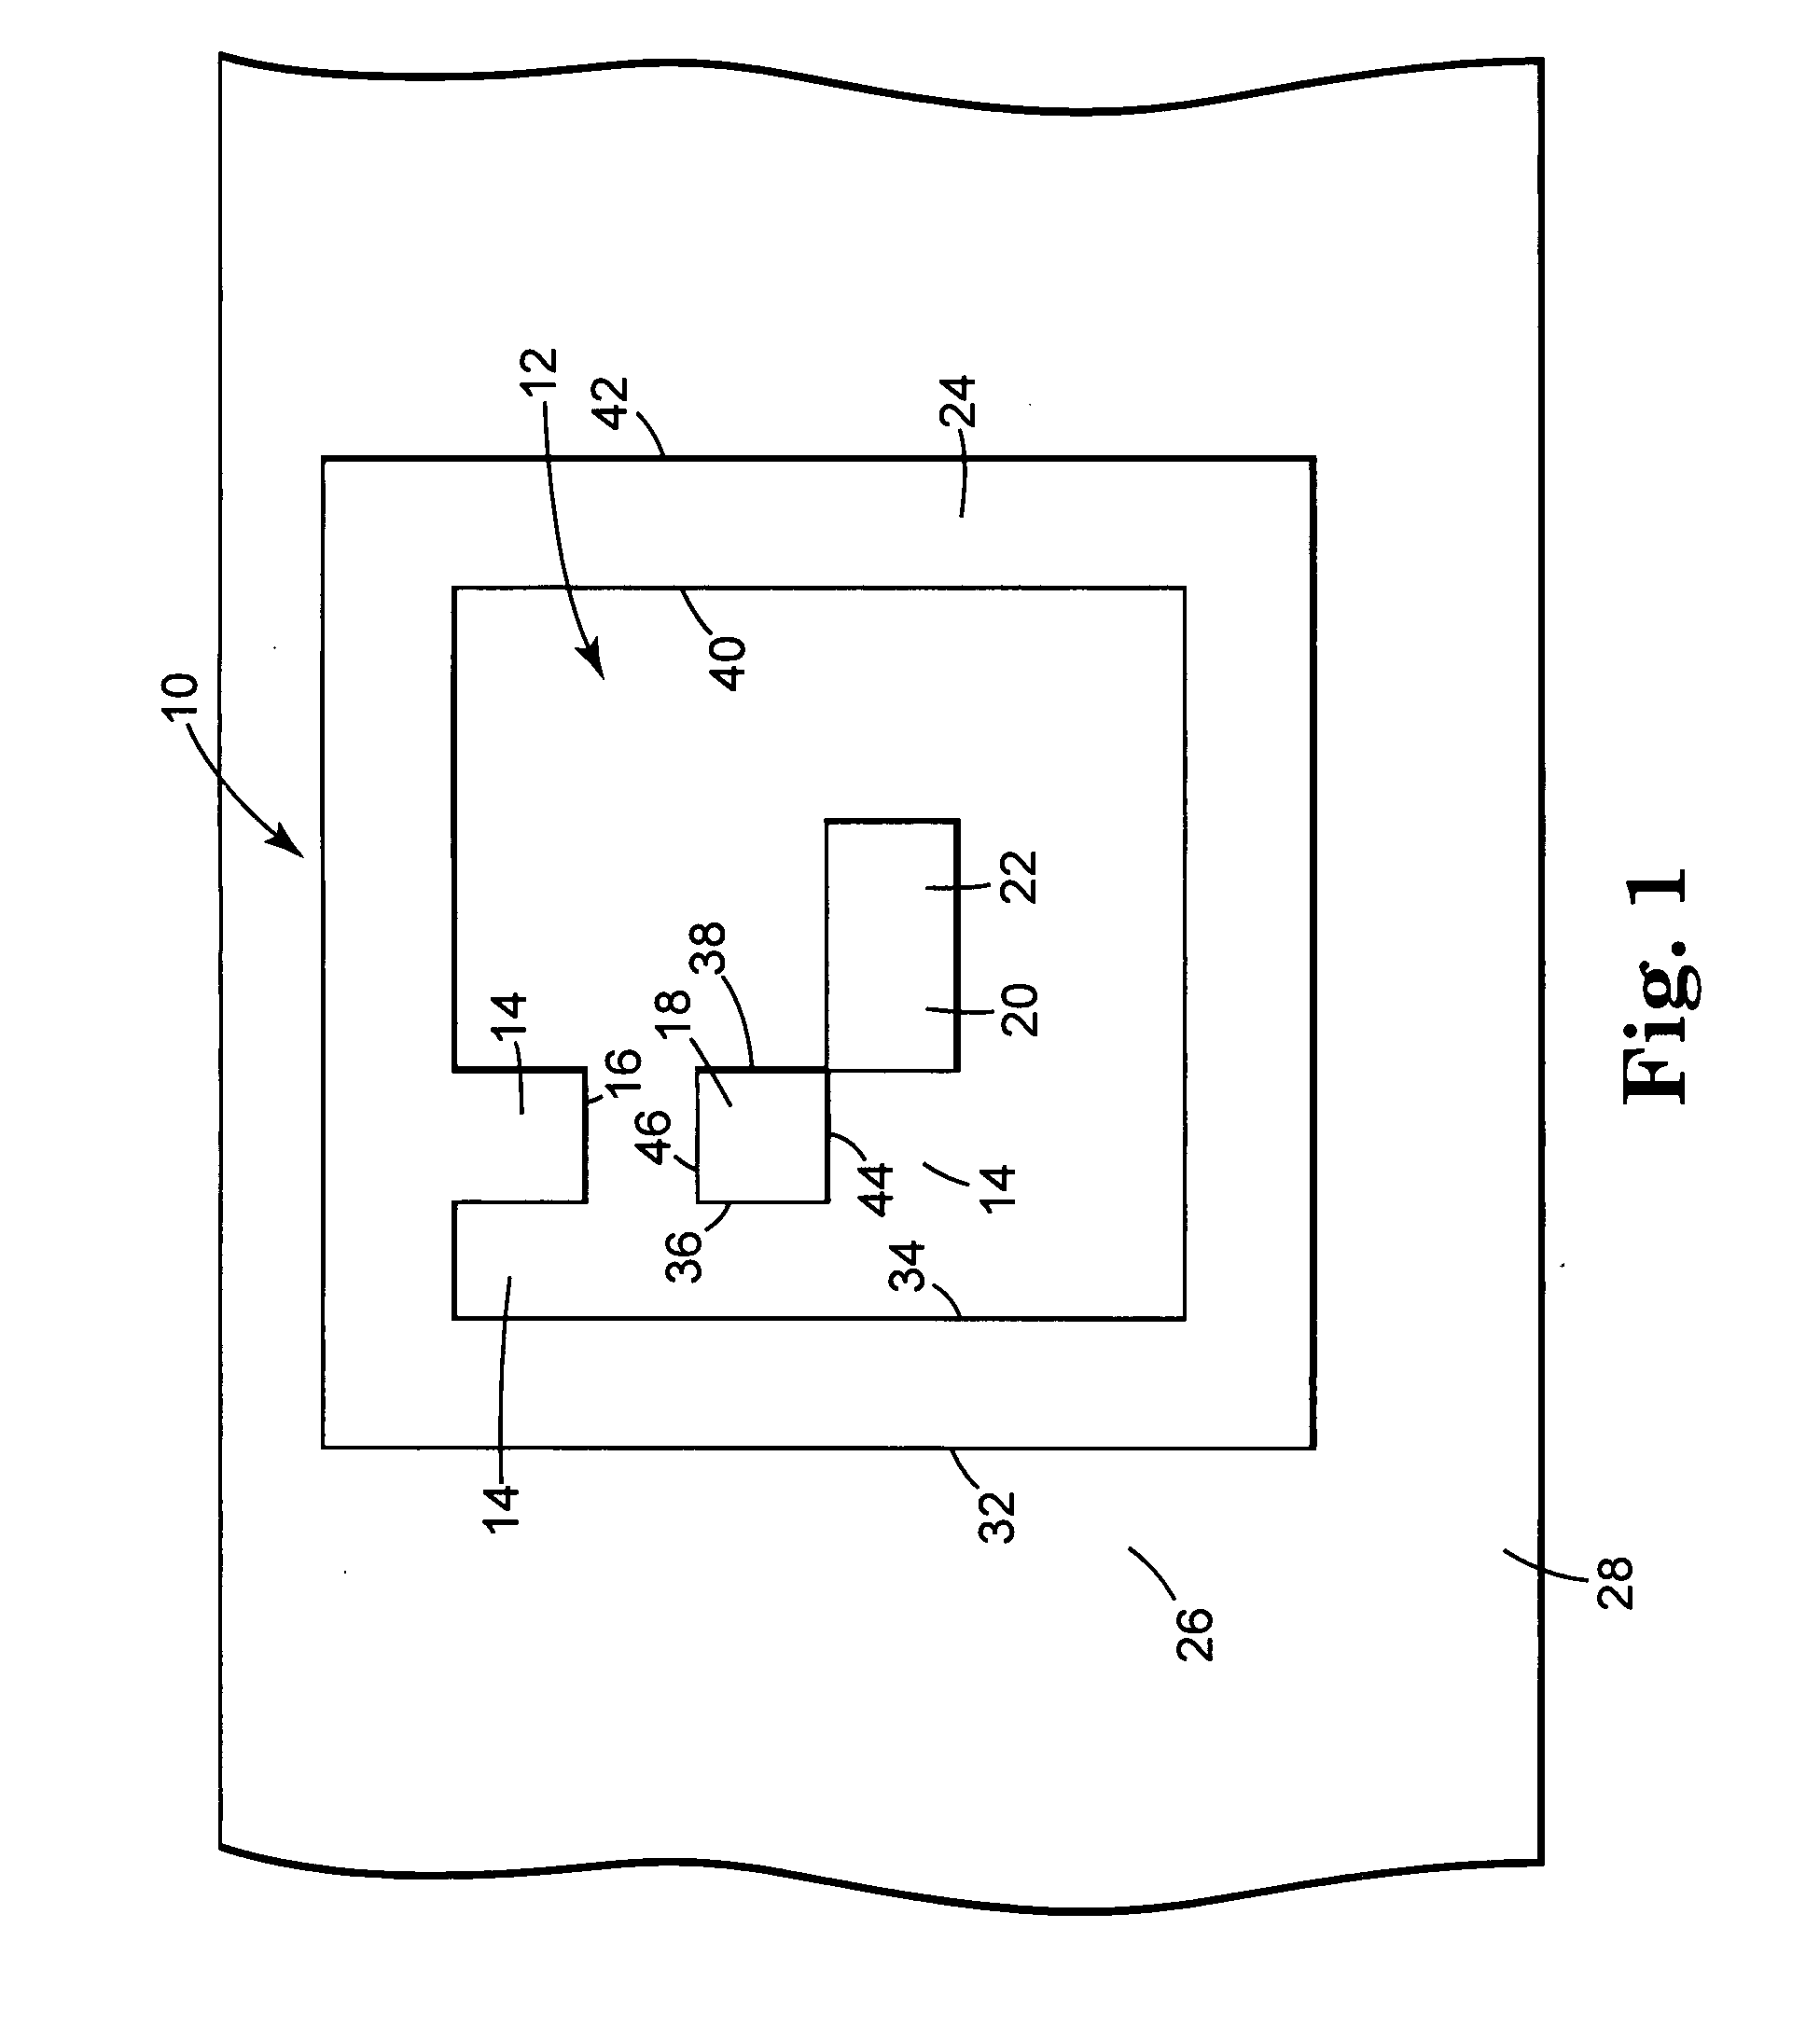 Multi-dimensional symbologies and related methods